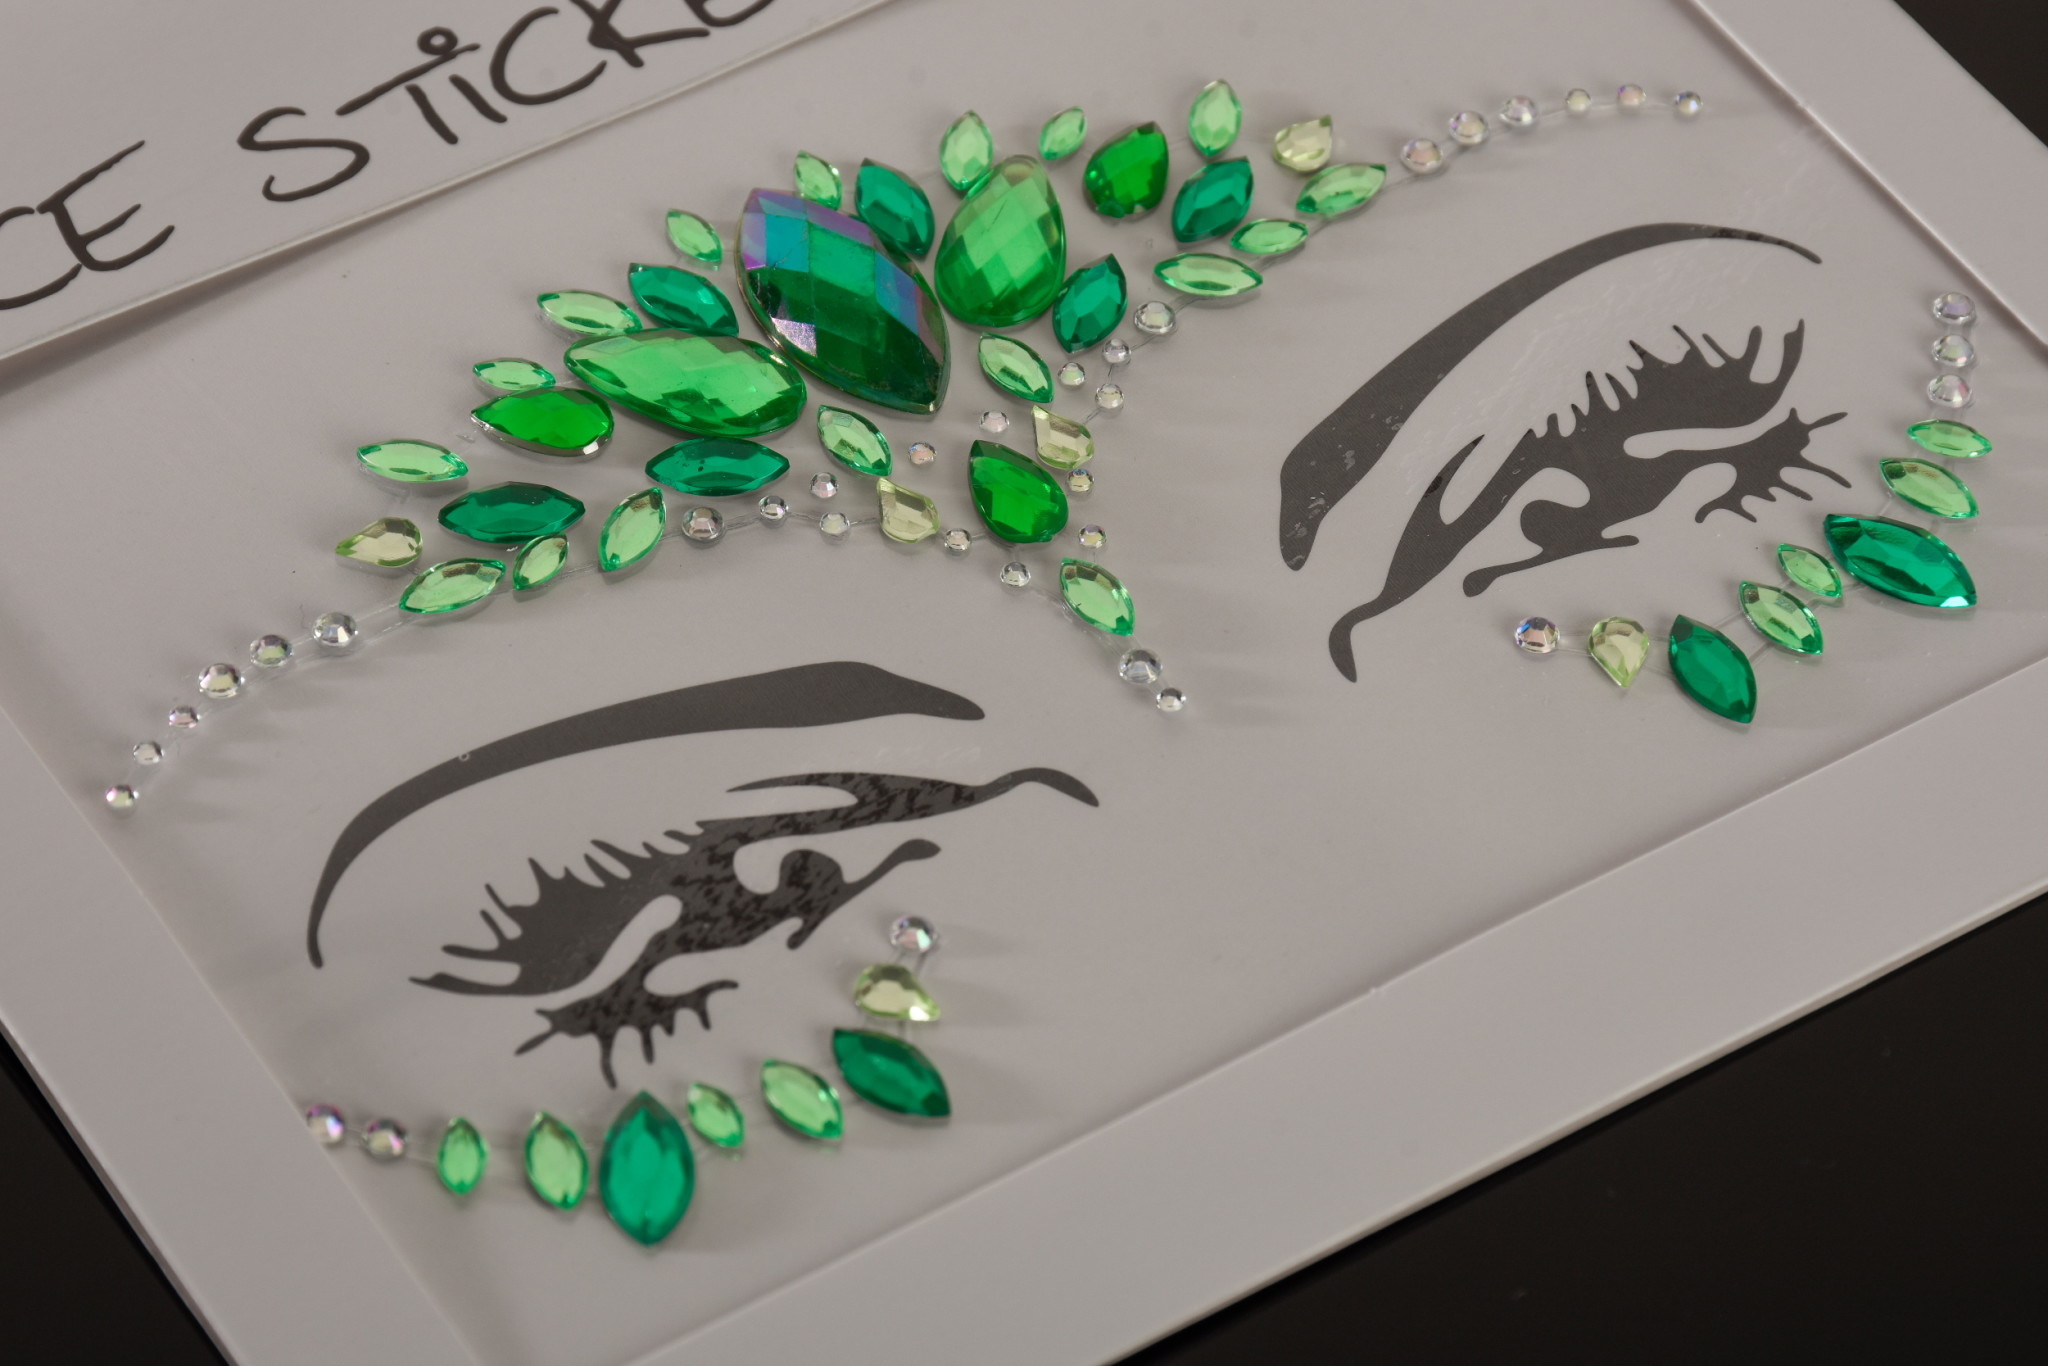 FH2 "Rhinestoned Face Jewels", FH2 FJS007, color: Green